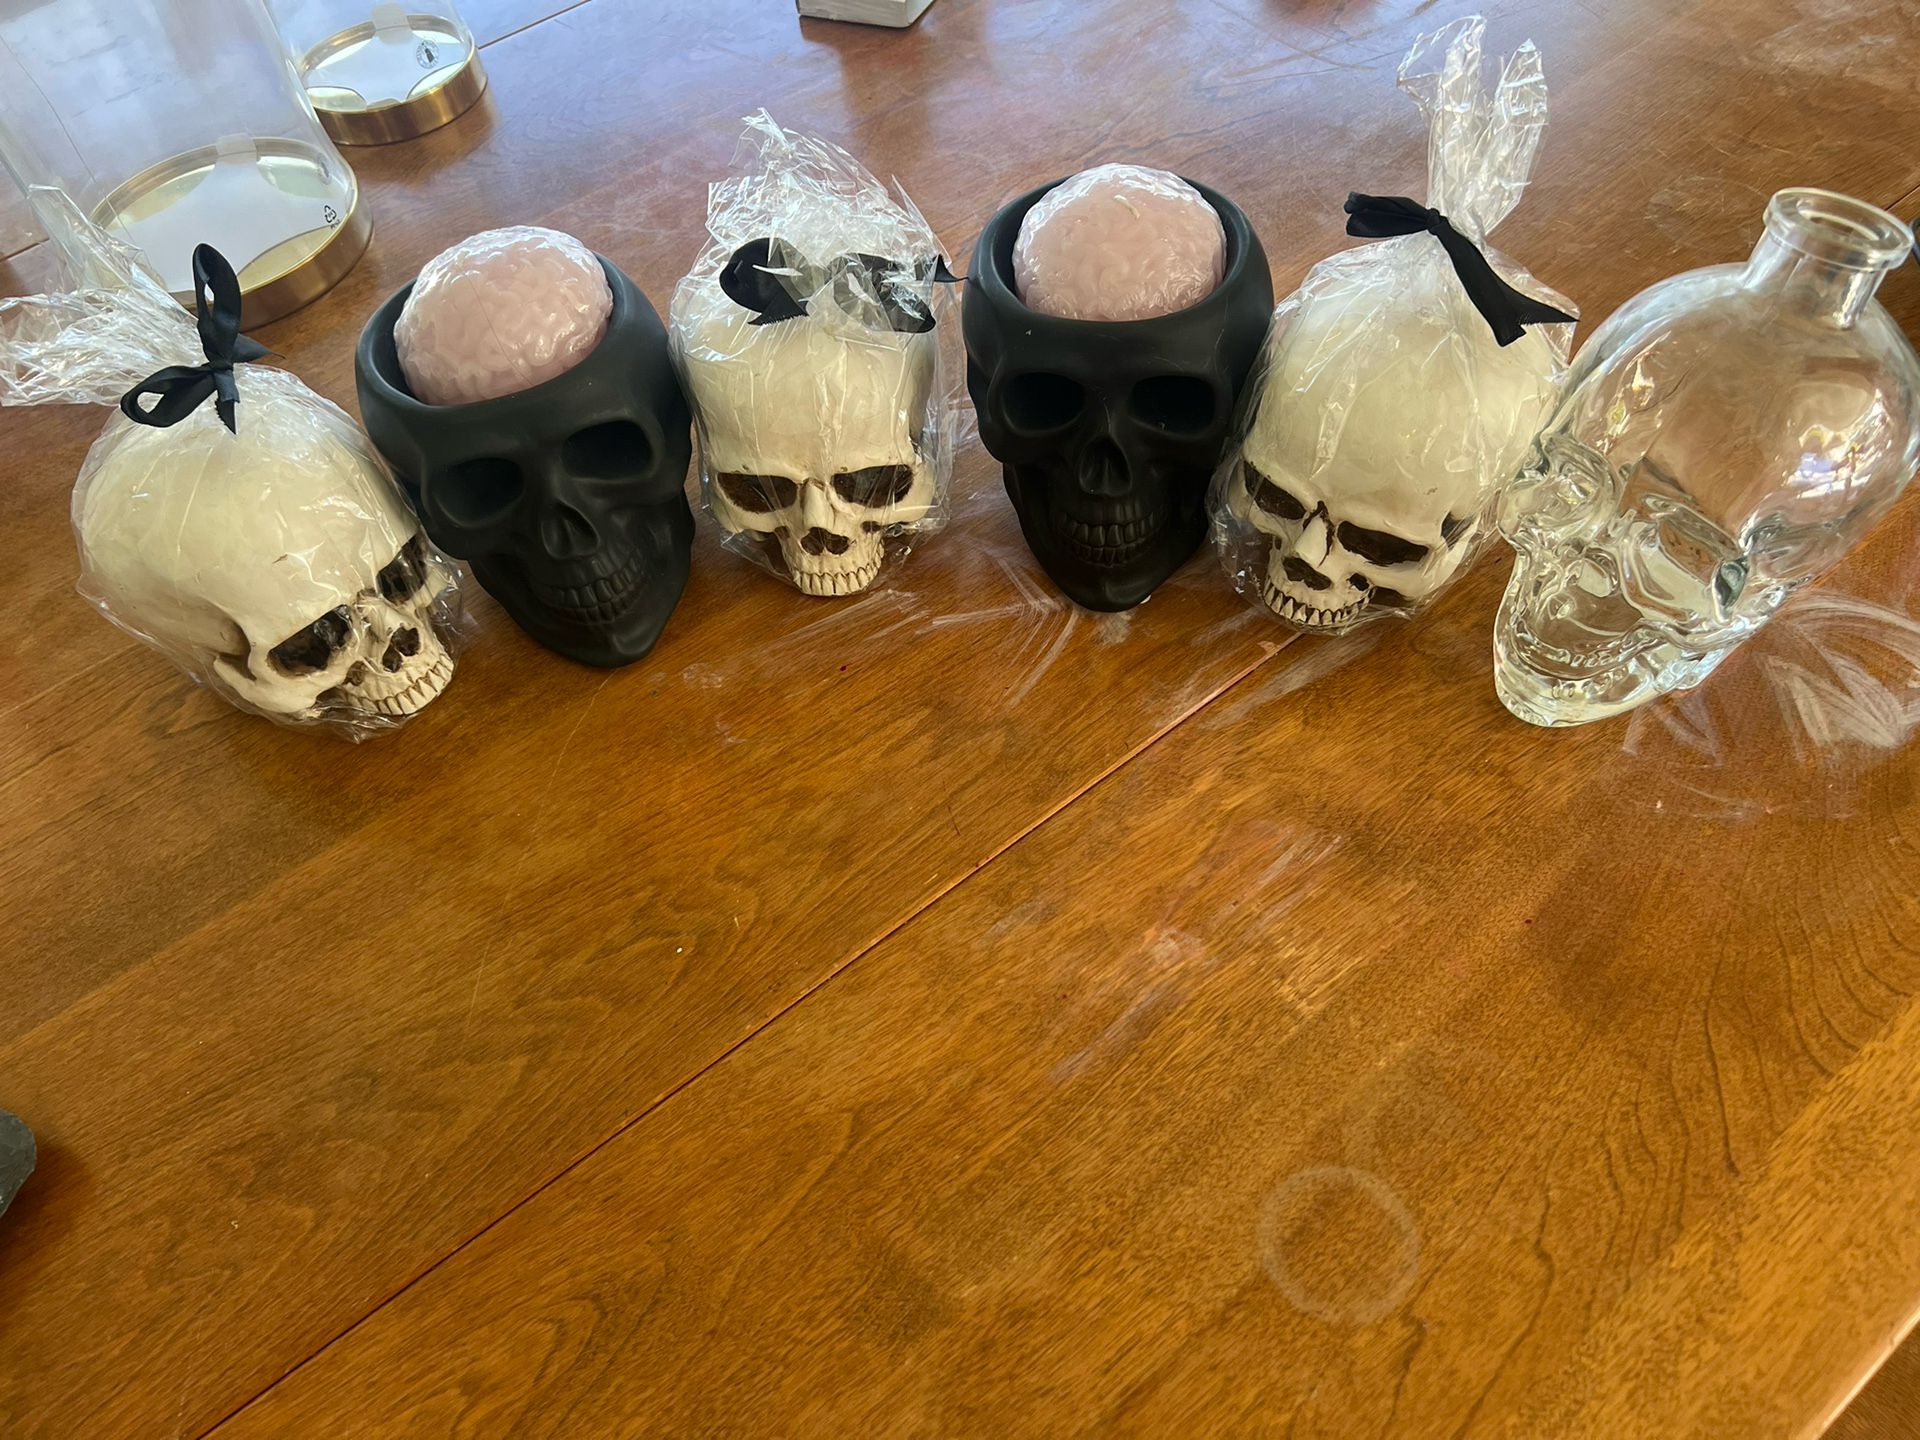 White Skull Candles, Black Candle Holders With “brain” Candles And Glass Skull 